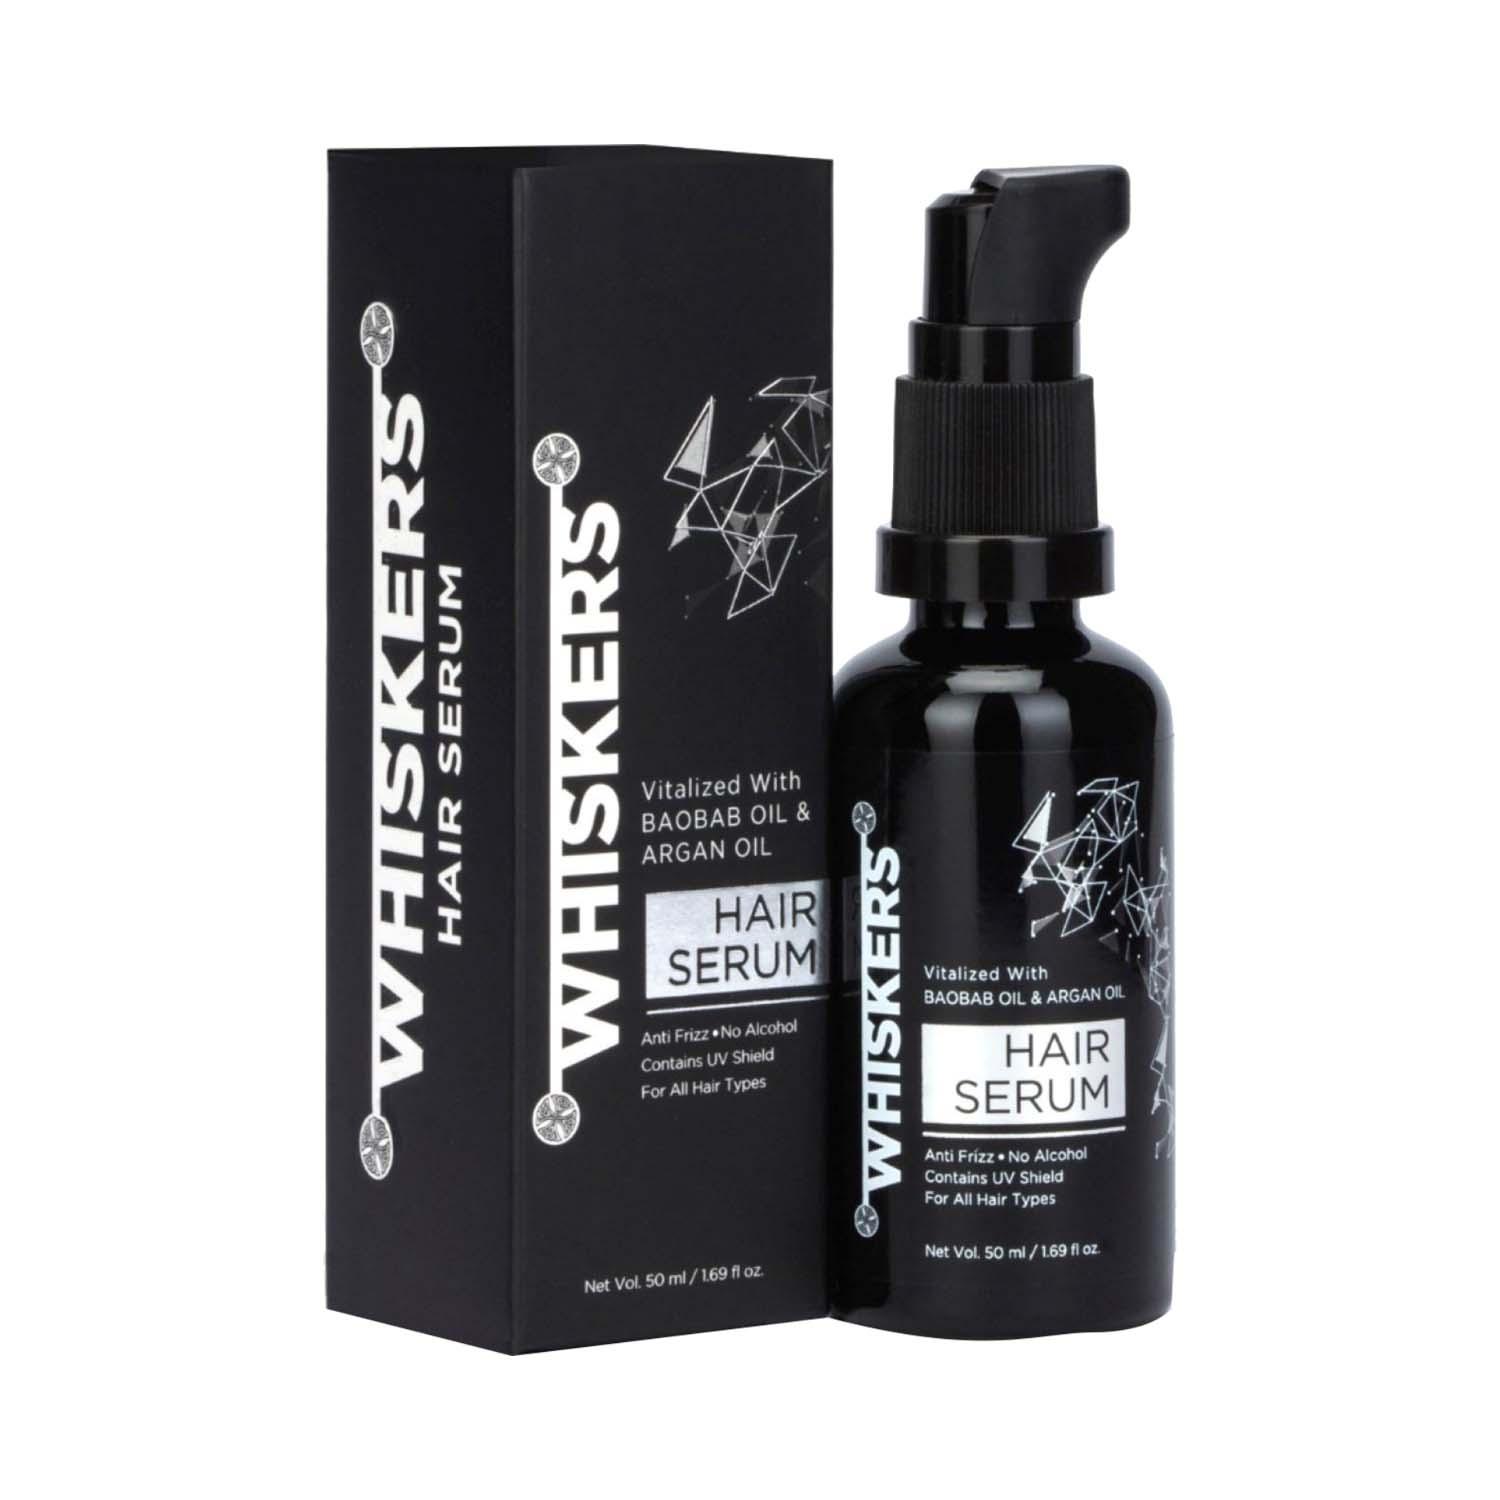 WHISKERS | WHISKERS Vitalized With Baobab Oil and Argan Oil Hair Serum For Men (50 ml)